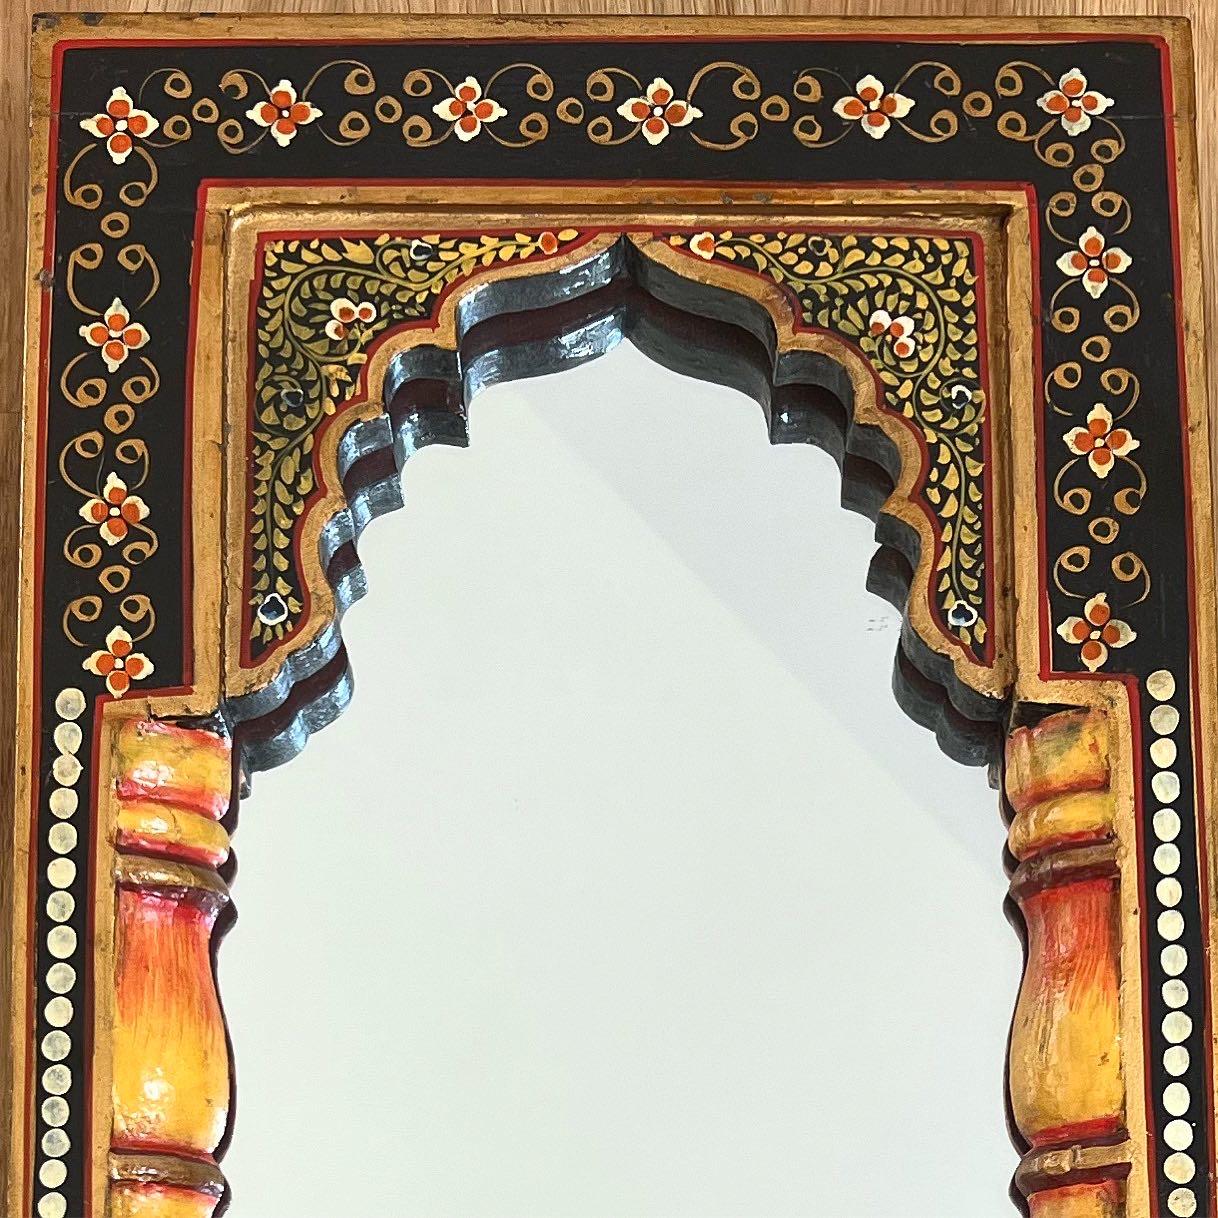 A vintage hand-painted Indian archway mirror, 1940s. Tones of tangerine, marigold, pomegranate, and ebony. Ready to hang. Faint signs of age but no outward flaws.
Dimensions:
10” x 13” x 1.25”.